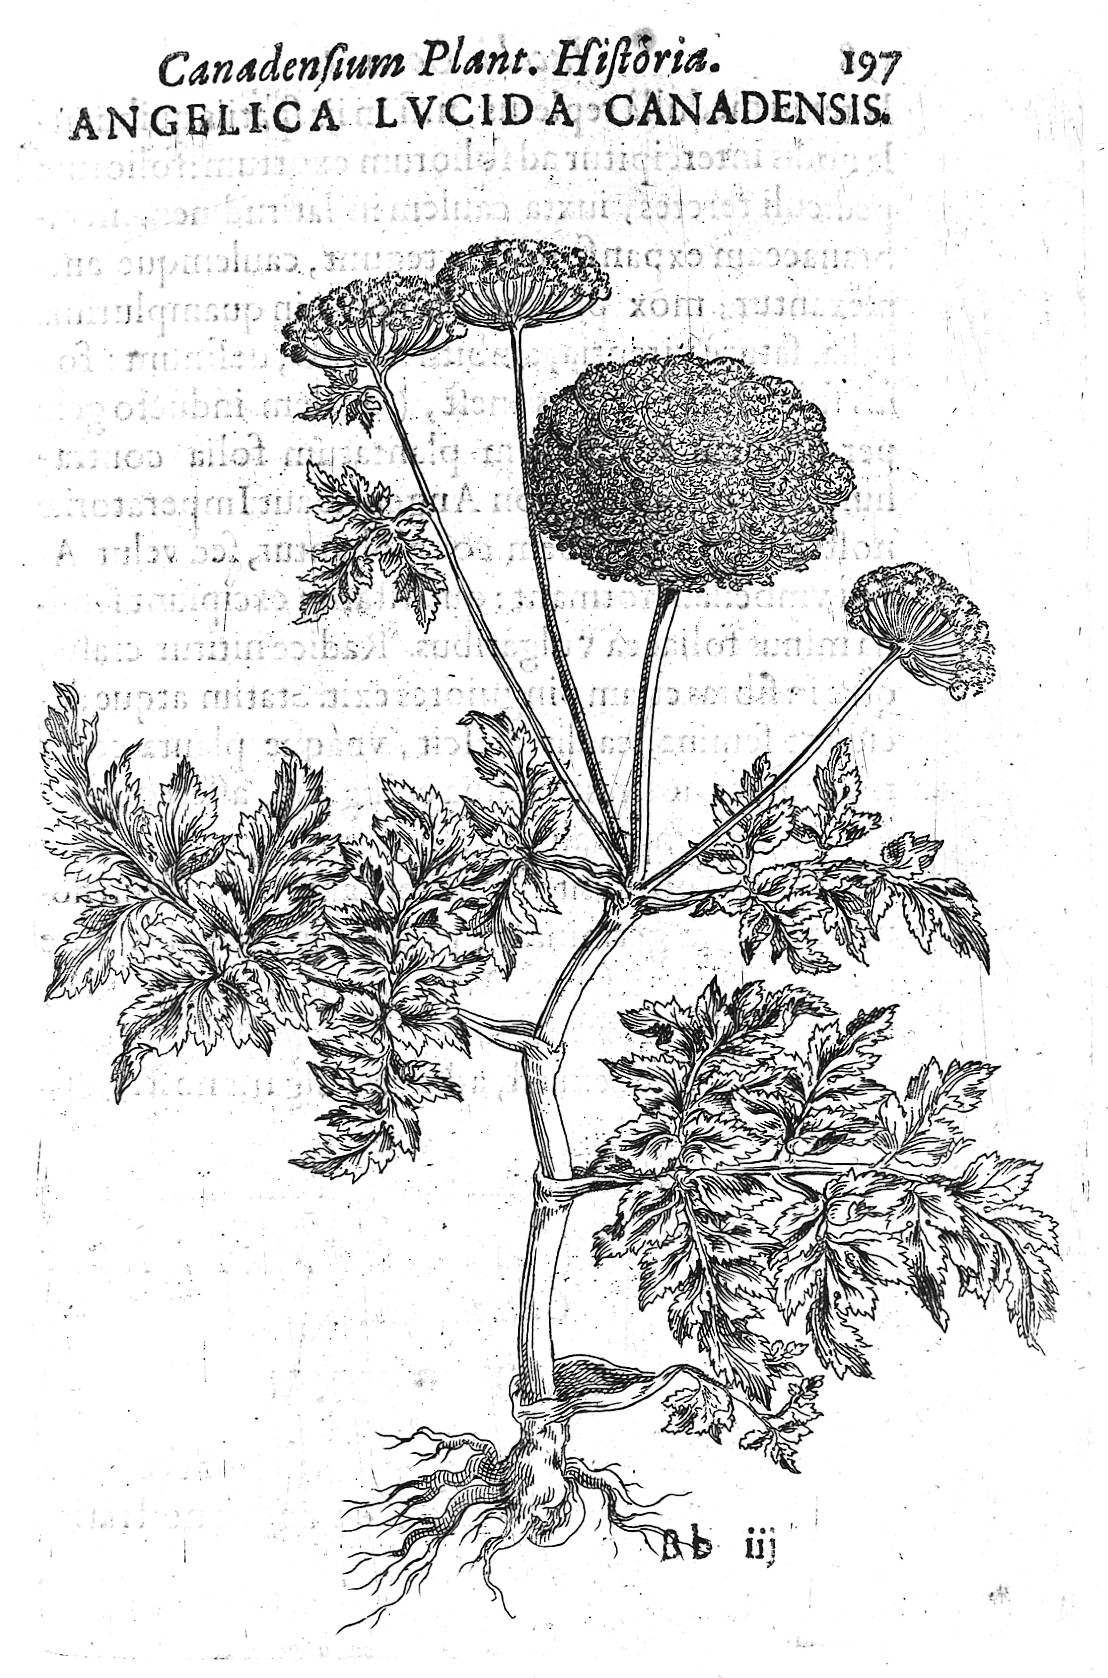 An illustration of Angelica Lucida Canadensis, from Jacques-Philippe Cornut, Canadensium Plantarum aliarumque nondum editarum Historia (Paris, 1635). Wellcome Library, London. Angelica was a common ingredient in plague remedies and its healing properties were said to be revealed to mankind by the archangel Raphael. CC BY 4.0, https://commons.wikimedia.org/w/index.php?curid=35944583